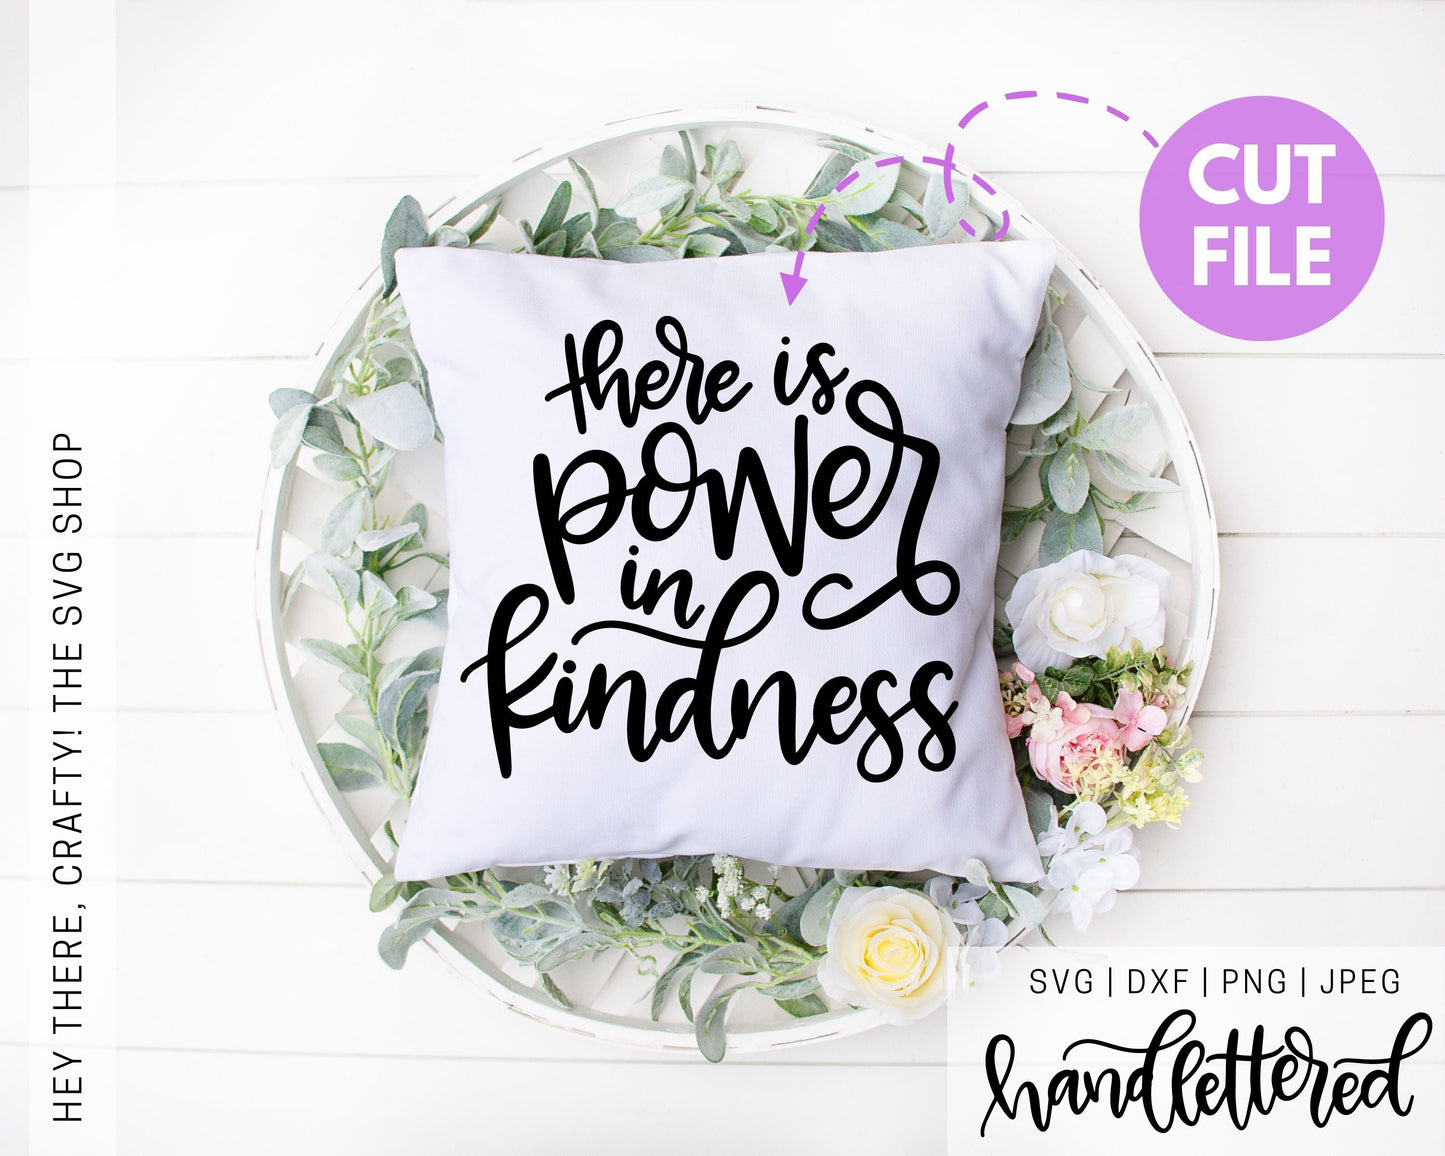 There Is Power In Kindness | SVG, PNG, DXF, JPEG